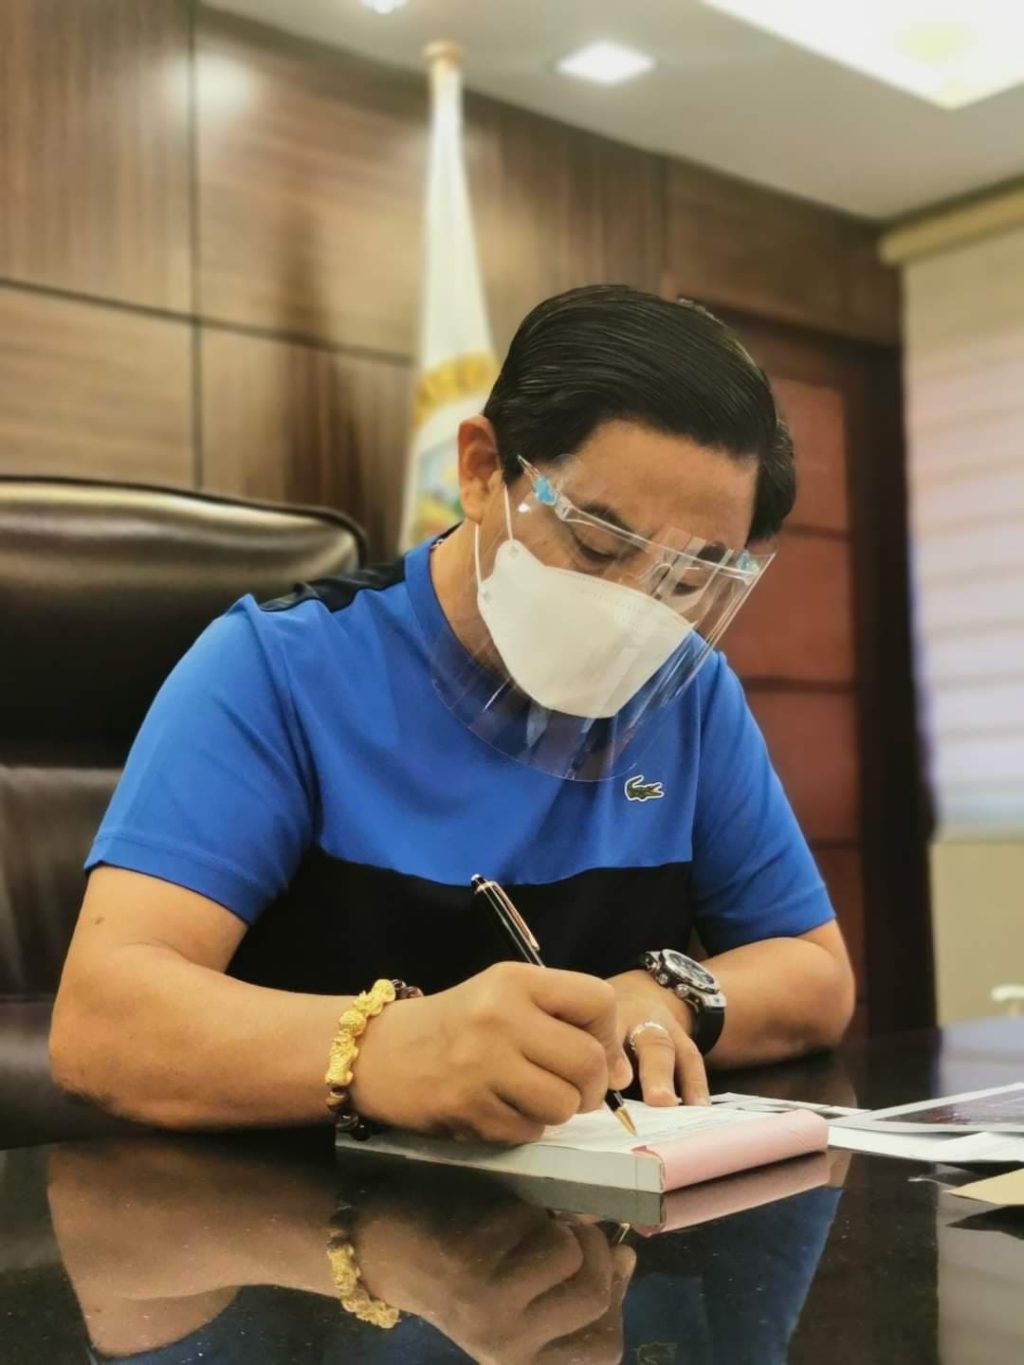 Lapu-Lapu City Mayor Junard "Ahong" Chan says he will meet with the Sangguniang Kabataan councilors of Barangay Pusok, who submitted their resignation letter, together with the SK chairman and barangay council officials to discuss their issues and concerns and the reason for their decision to step down from their posts . | Photo courtesy of Lapu-Lapu PIO (file photo)